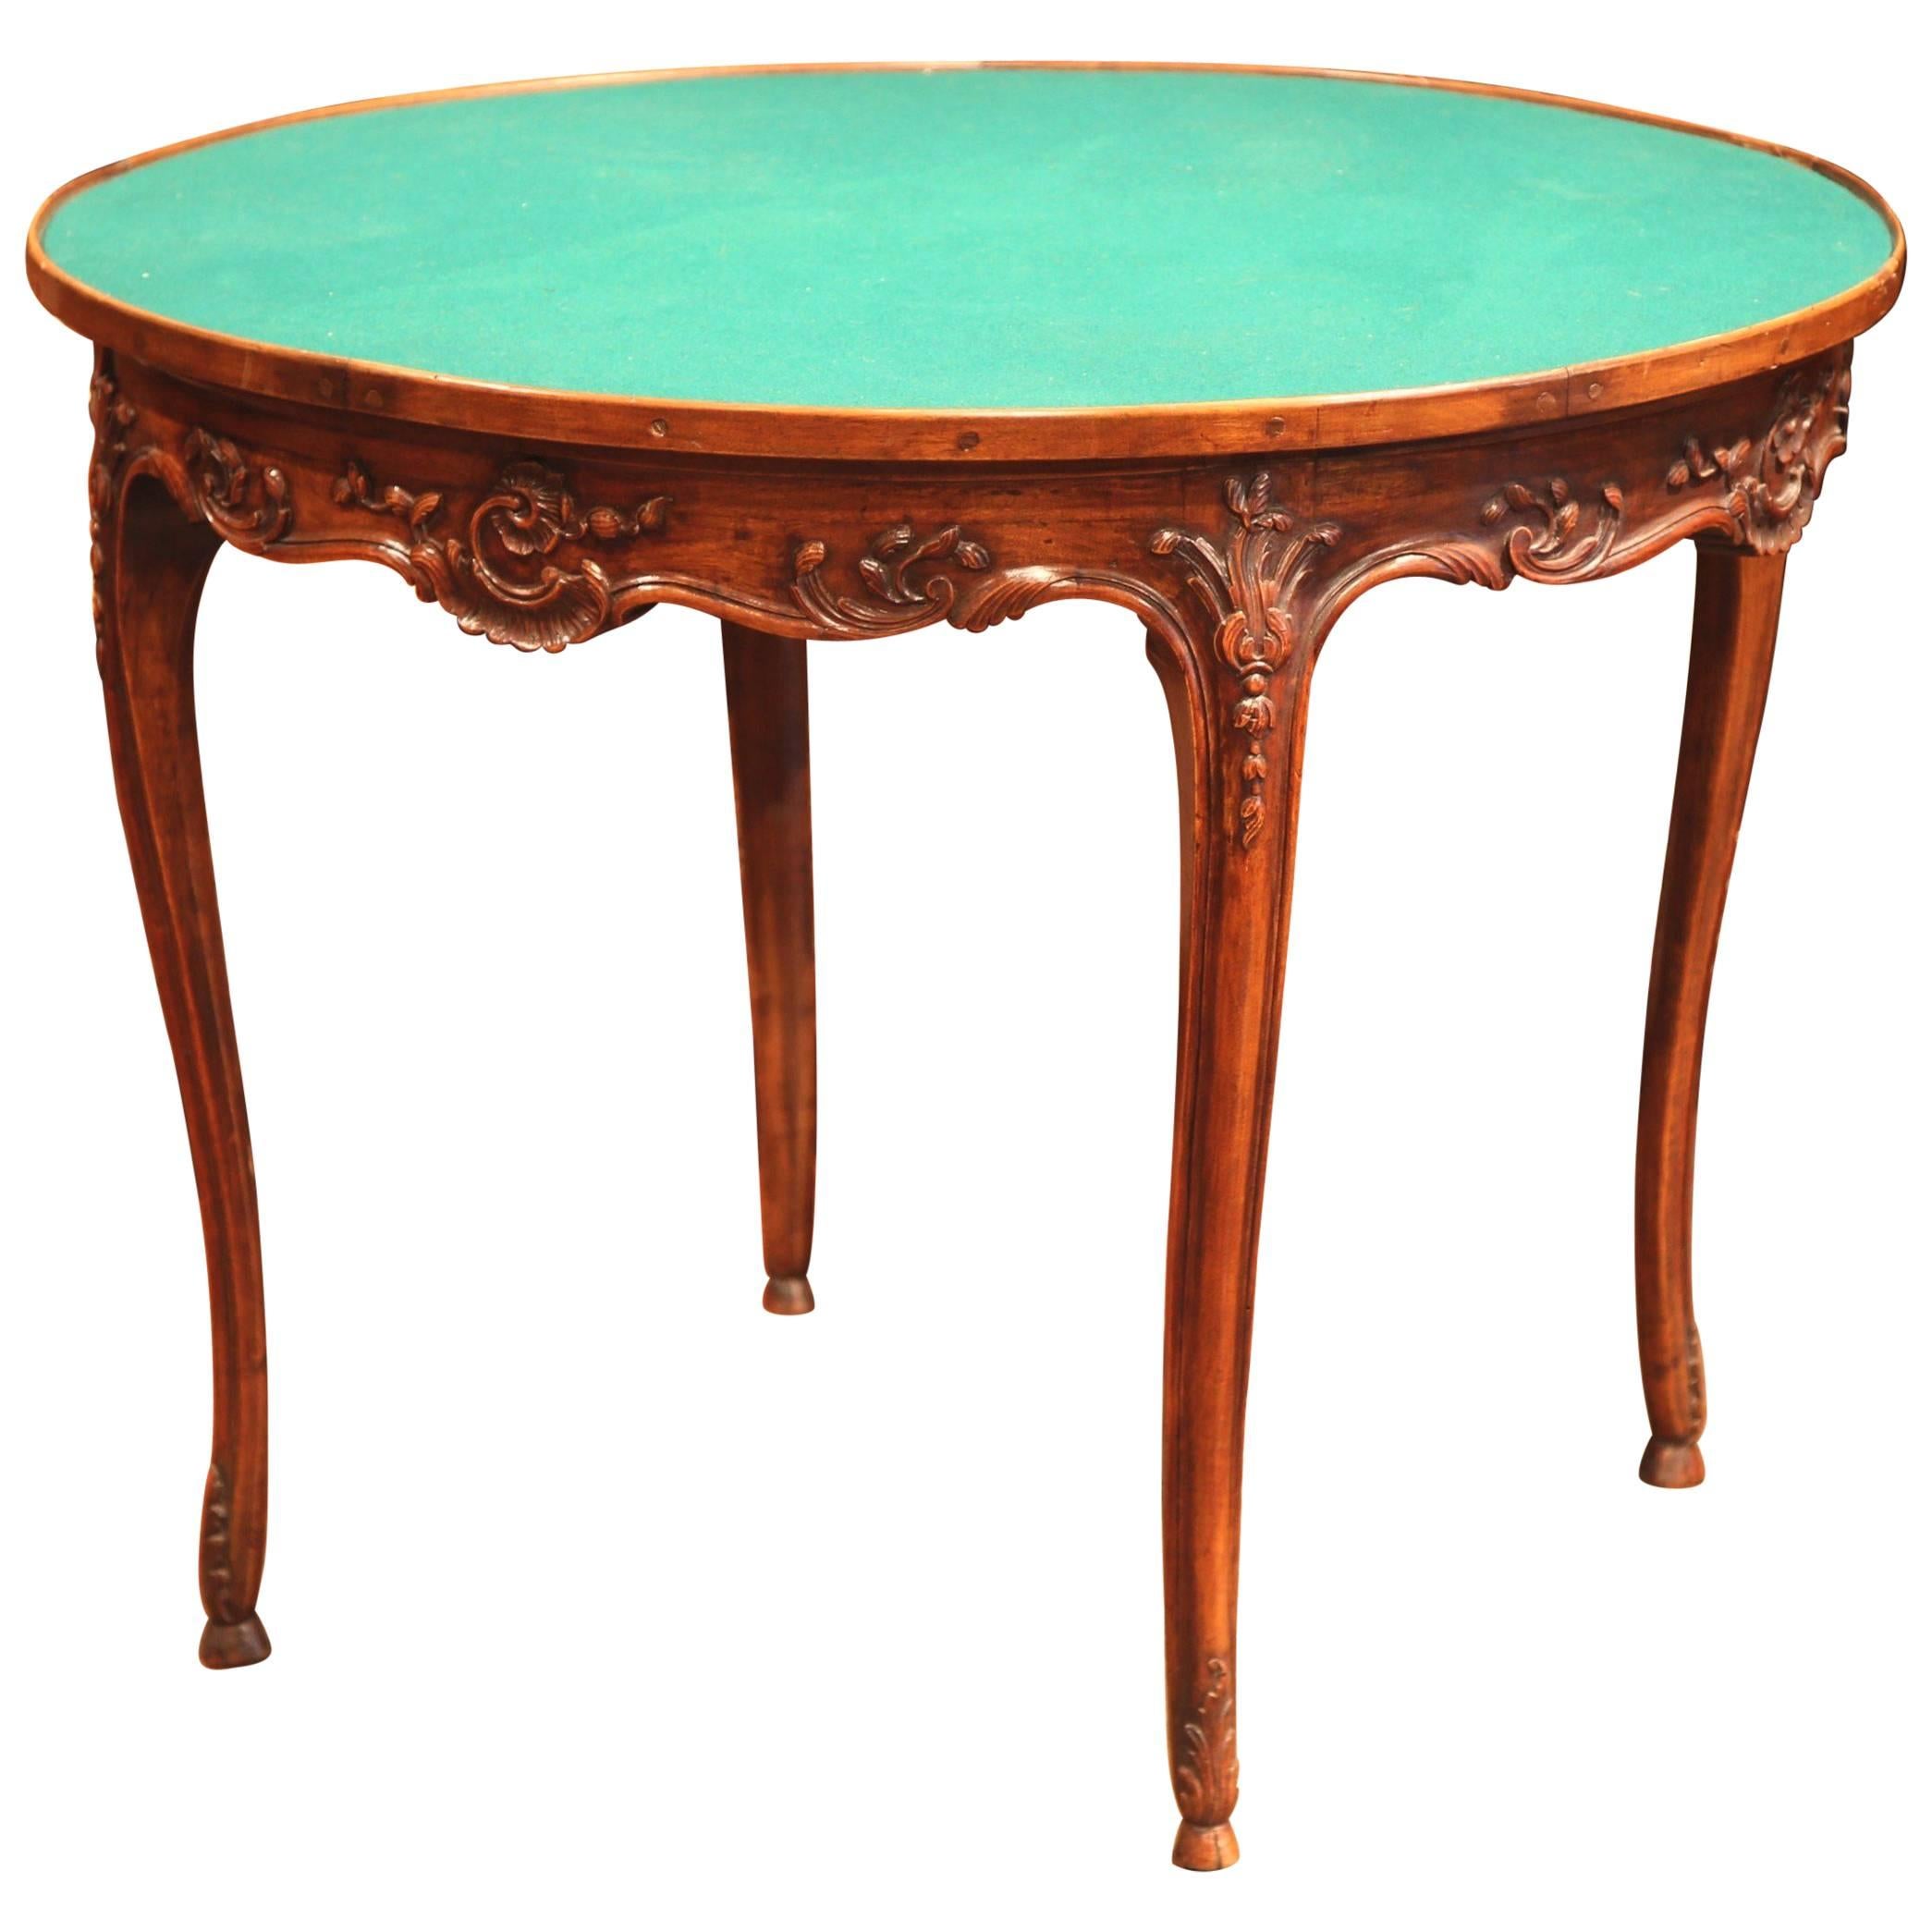 Early 20th Century French Louis XV Carved Walnut Round Game Table with Felt